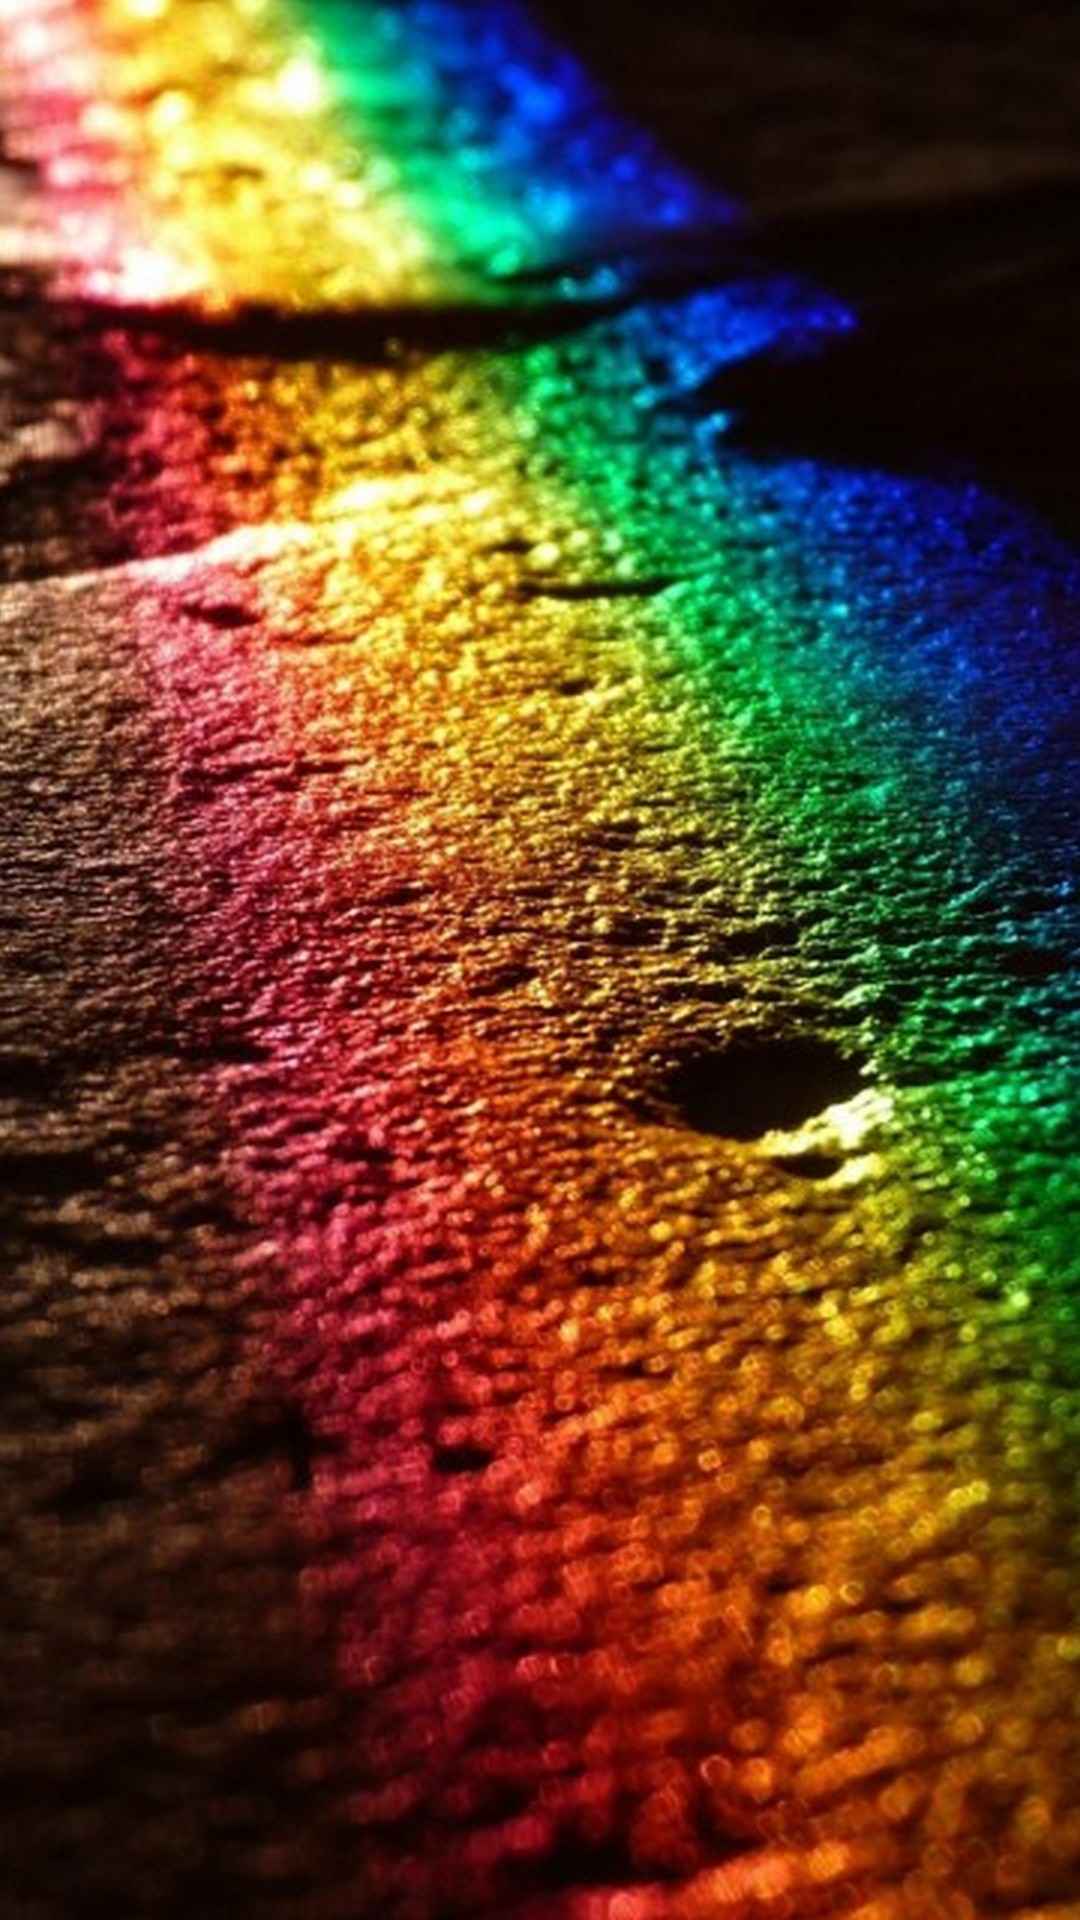 Android Wallpaper Rainbow with image resolution 1080x1920 pixel. You can make this wallpaper for your Android backgrounds, Tablet, Smartphones Screensavers and Mobile Phone Lock Screen